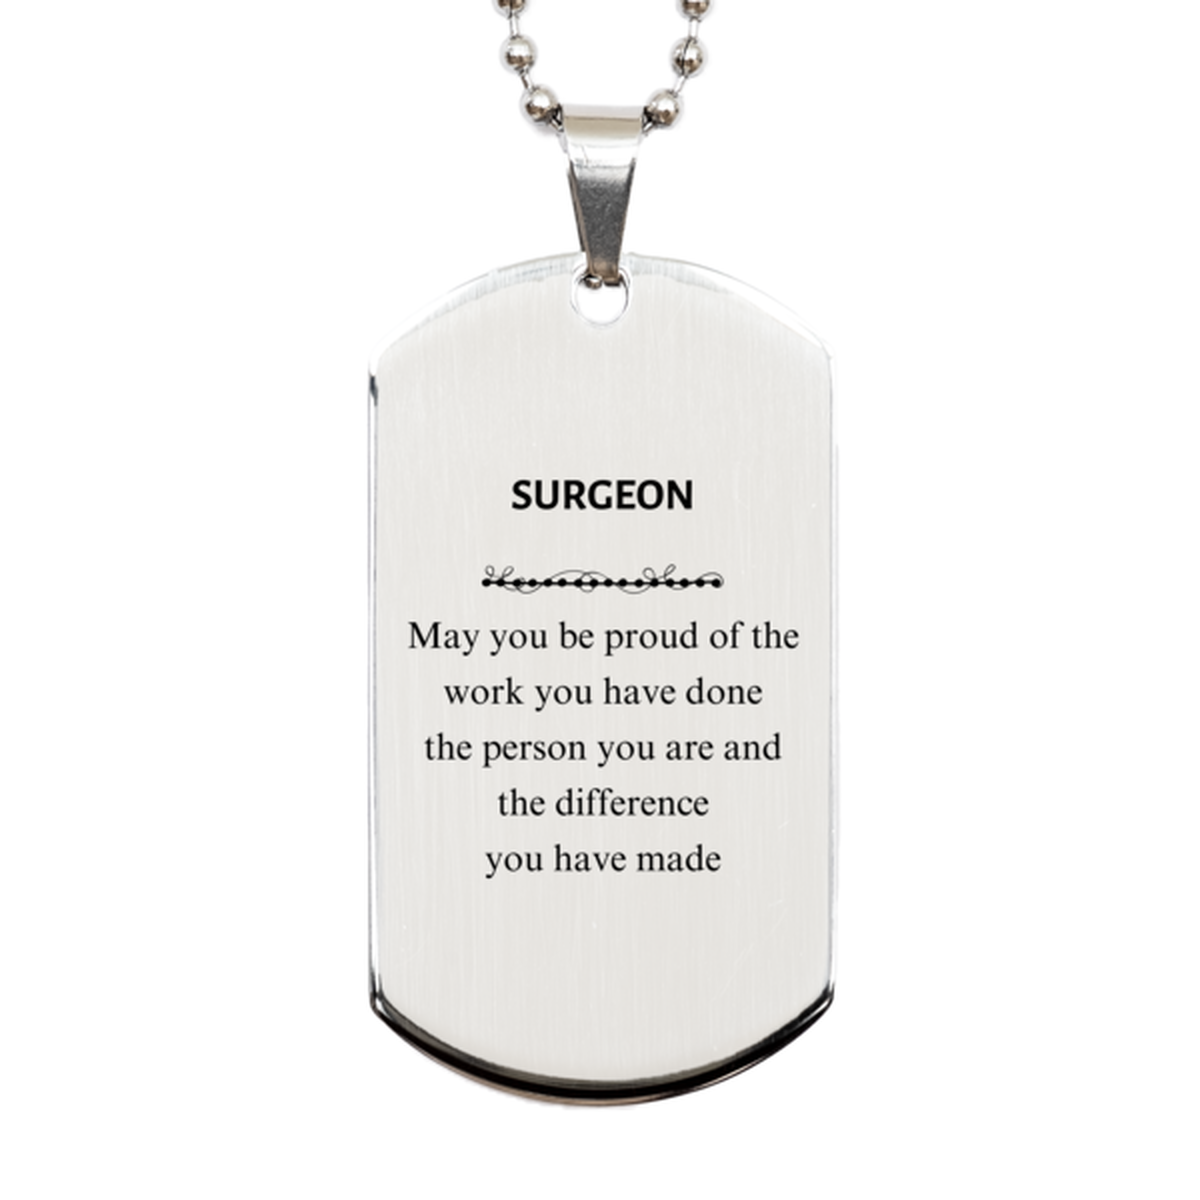 Surgeon May you be proud of the work you have done, Retirement Surgeon Silver Dog Tag for Colleague Appreciation Gifts Amazing for Surgeon